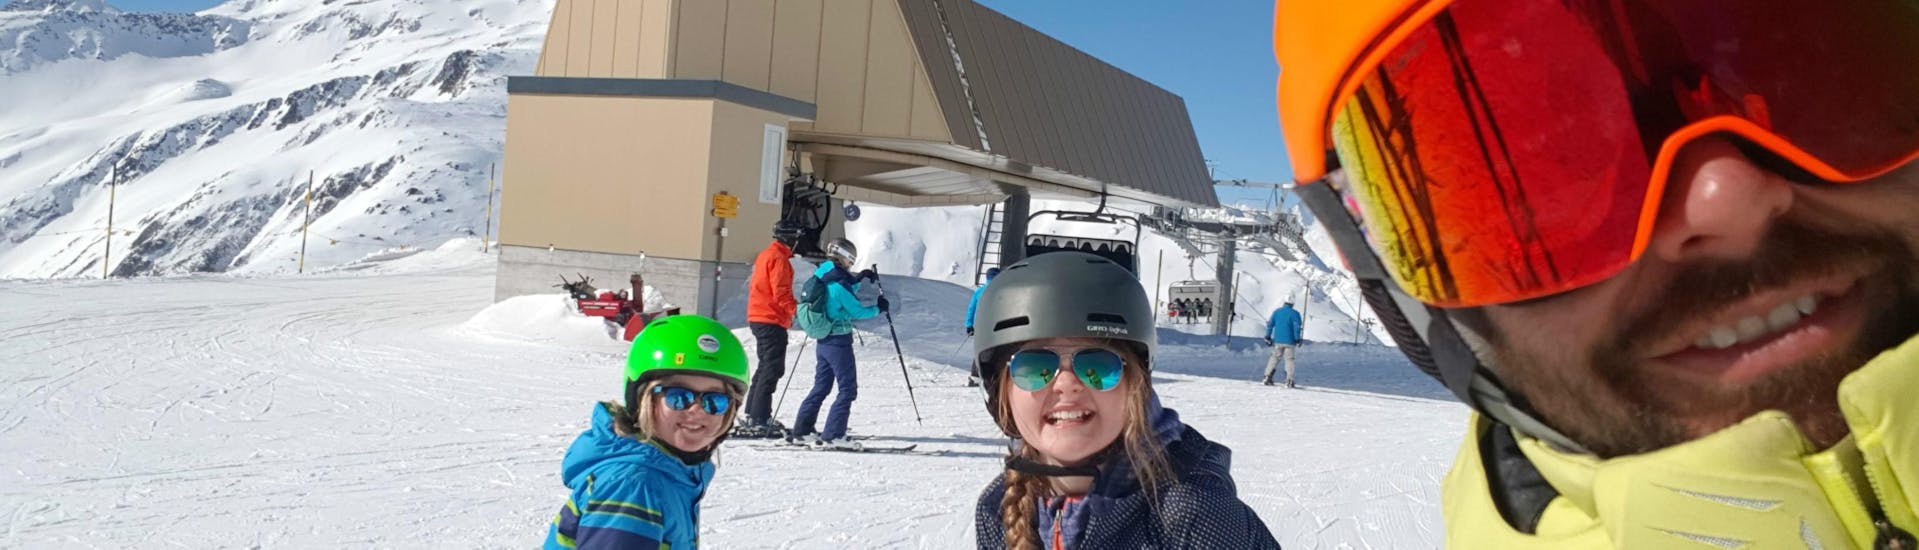 Two participants of the Kids Ski Lessons "Ils Camutschs" (4-17 years) are posing for a picture with their ski instructor from Skischule Monntains.